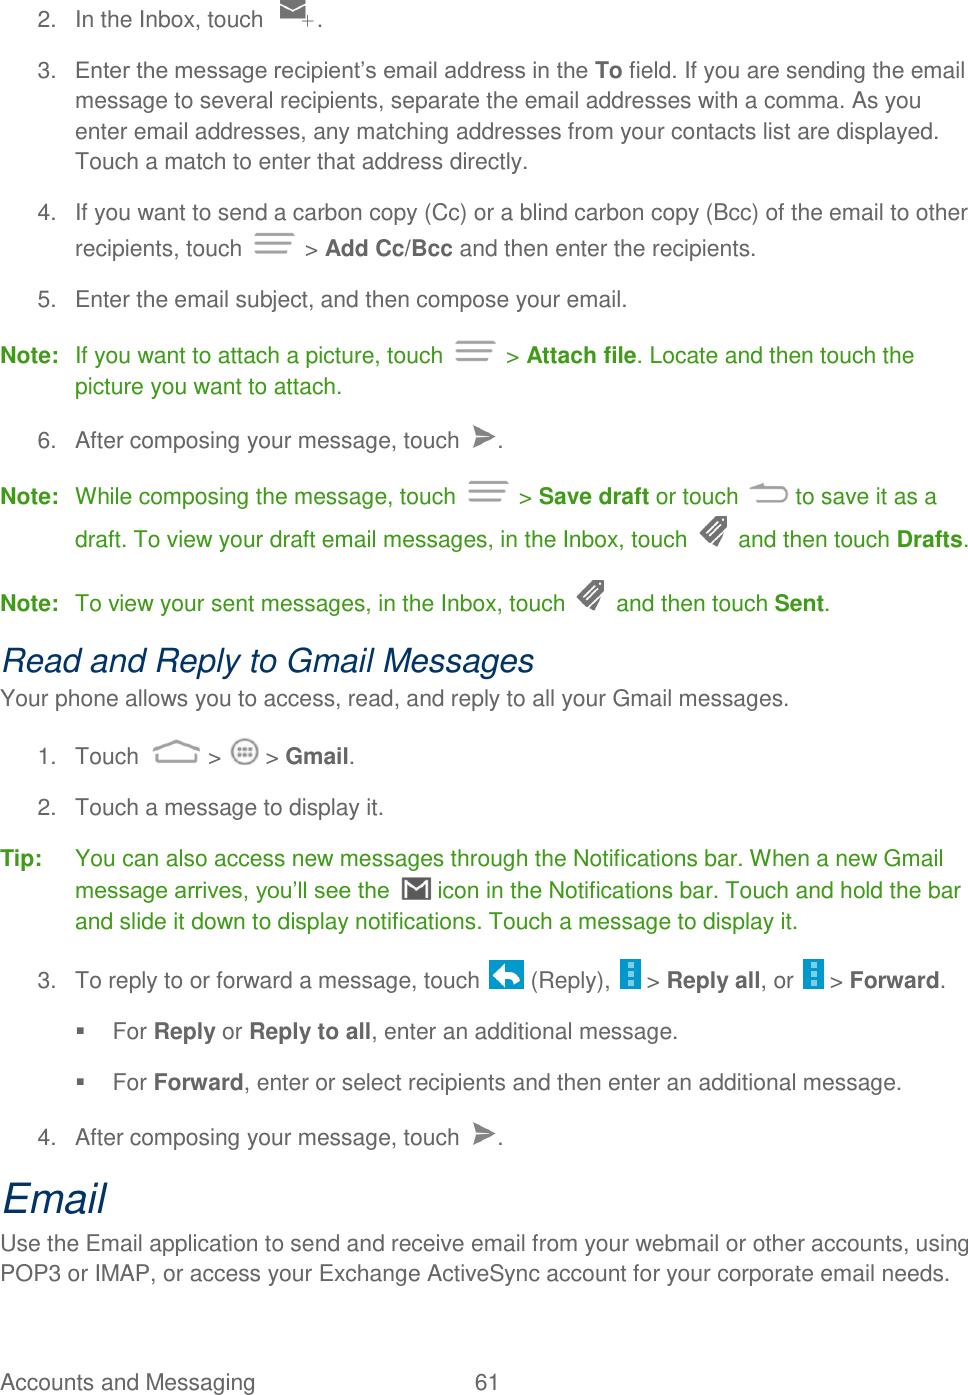 Accounts and Messaging  61   2.  In the Inbox, touch  . 3. Enter the message recipient‟s email address in the To field. If you are sending the email message to several recipients, separate the email addresses with a comma. As you enter email addresses, any matching addresses from your contacts list are displayed. Touch a match to enter that address directly. 4.  If you want to send a carbon copy (Cc) or a blind carbon copy (Bcc) of the email to other recipients, touch   &gt; Add Cc/Bcc and then enter the recipients. 5.  Enter the email subject, and then compose your email. Note:  If you want to attach a picture, touch   &gt; Attach file. Locate and then touch the picture you want to attach. 6.  After composing your message, touch  . Note:  While composing the message, touch   &gt; Save draft or touch   to save it as a draft. To view your draft email messages, in the Inbox, touch   and then touch Drafts. Note:  To view your sent messages, in the Inbox, touch   and then touch Sent. Read and Reply to Gmail Messages Your phone allows you to access, read, and reply to all your Gmail messages. 1.  Touch   &gt;   &gt; Gmail. 2.  Touch a message to display it. Tip:  You can also access new messages through the Notifications bar. When a new Gmail message arrives, you‟ll see the   icon in the Notifications bar. Touch and hold the bar and slide it down to display notifications. Touch a message to display it.   3.  To reply to or forward a message, touch   (Reply),   &gt; Reply all, or   &gt; Forward.   For Reply or Reply to all, enter an additional message.   For Forward, enter or select recipients and then enter an additional message. 4.  After composing your message, touch  . Email Use the Email application to send and receive email from your webmail or other accounts, using POP3 or IMAP, or access your Exchange ActiveSync account for your corporate email needs. 